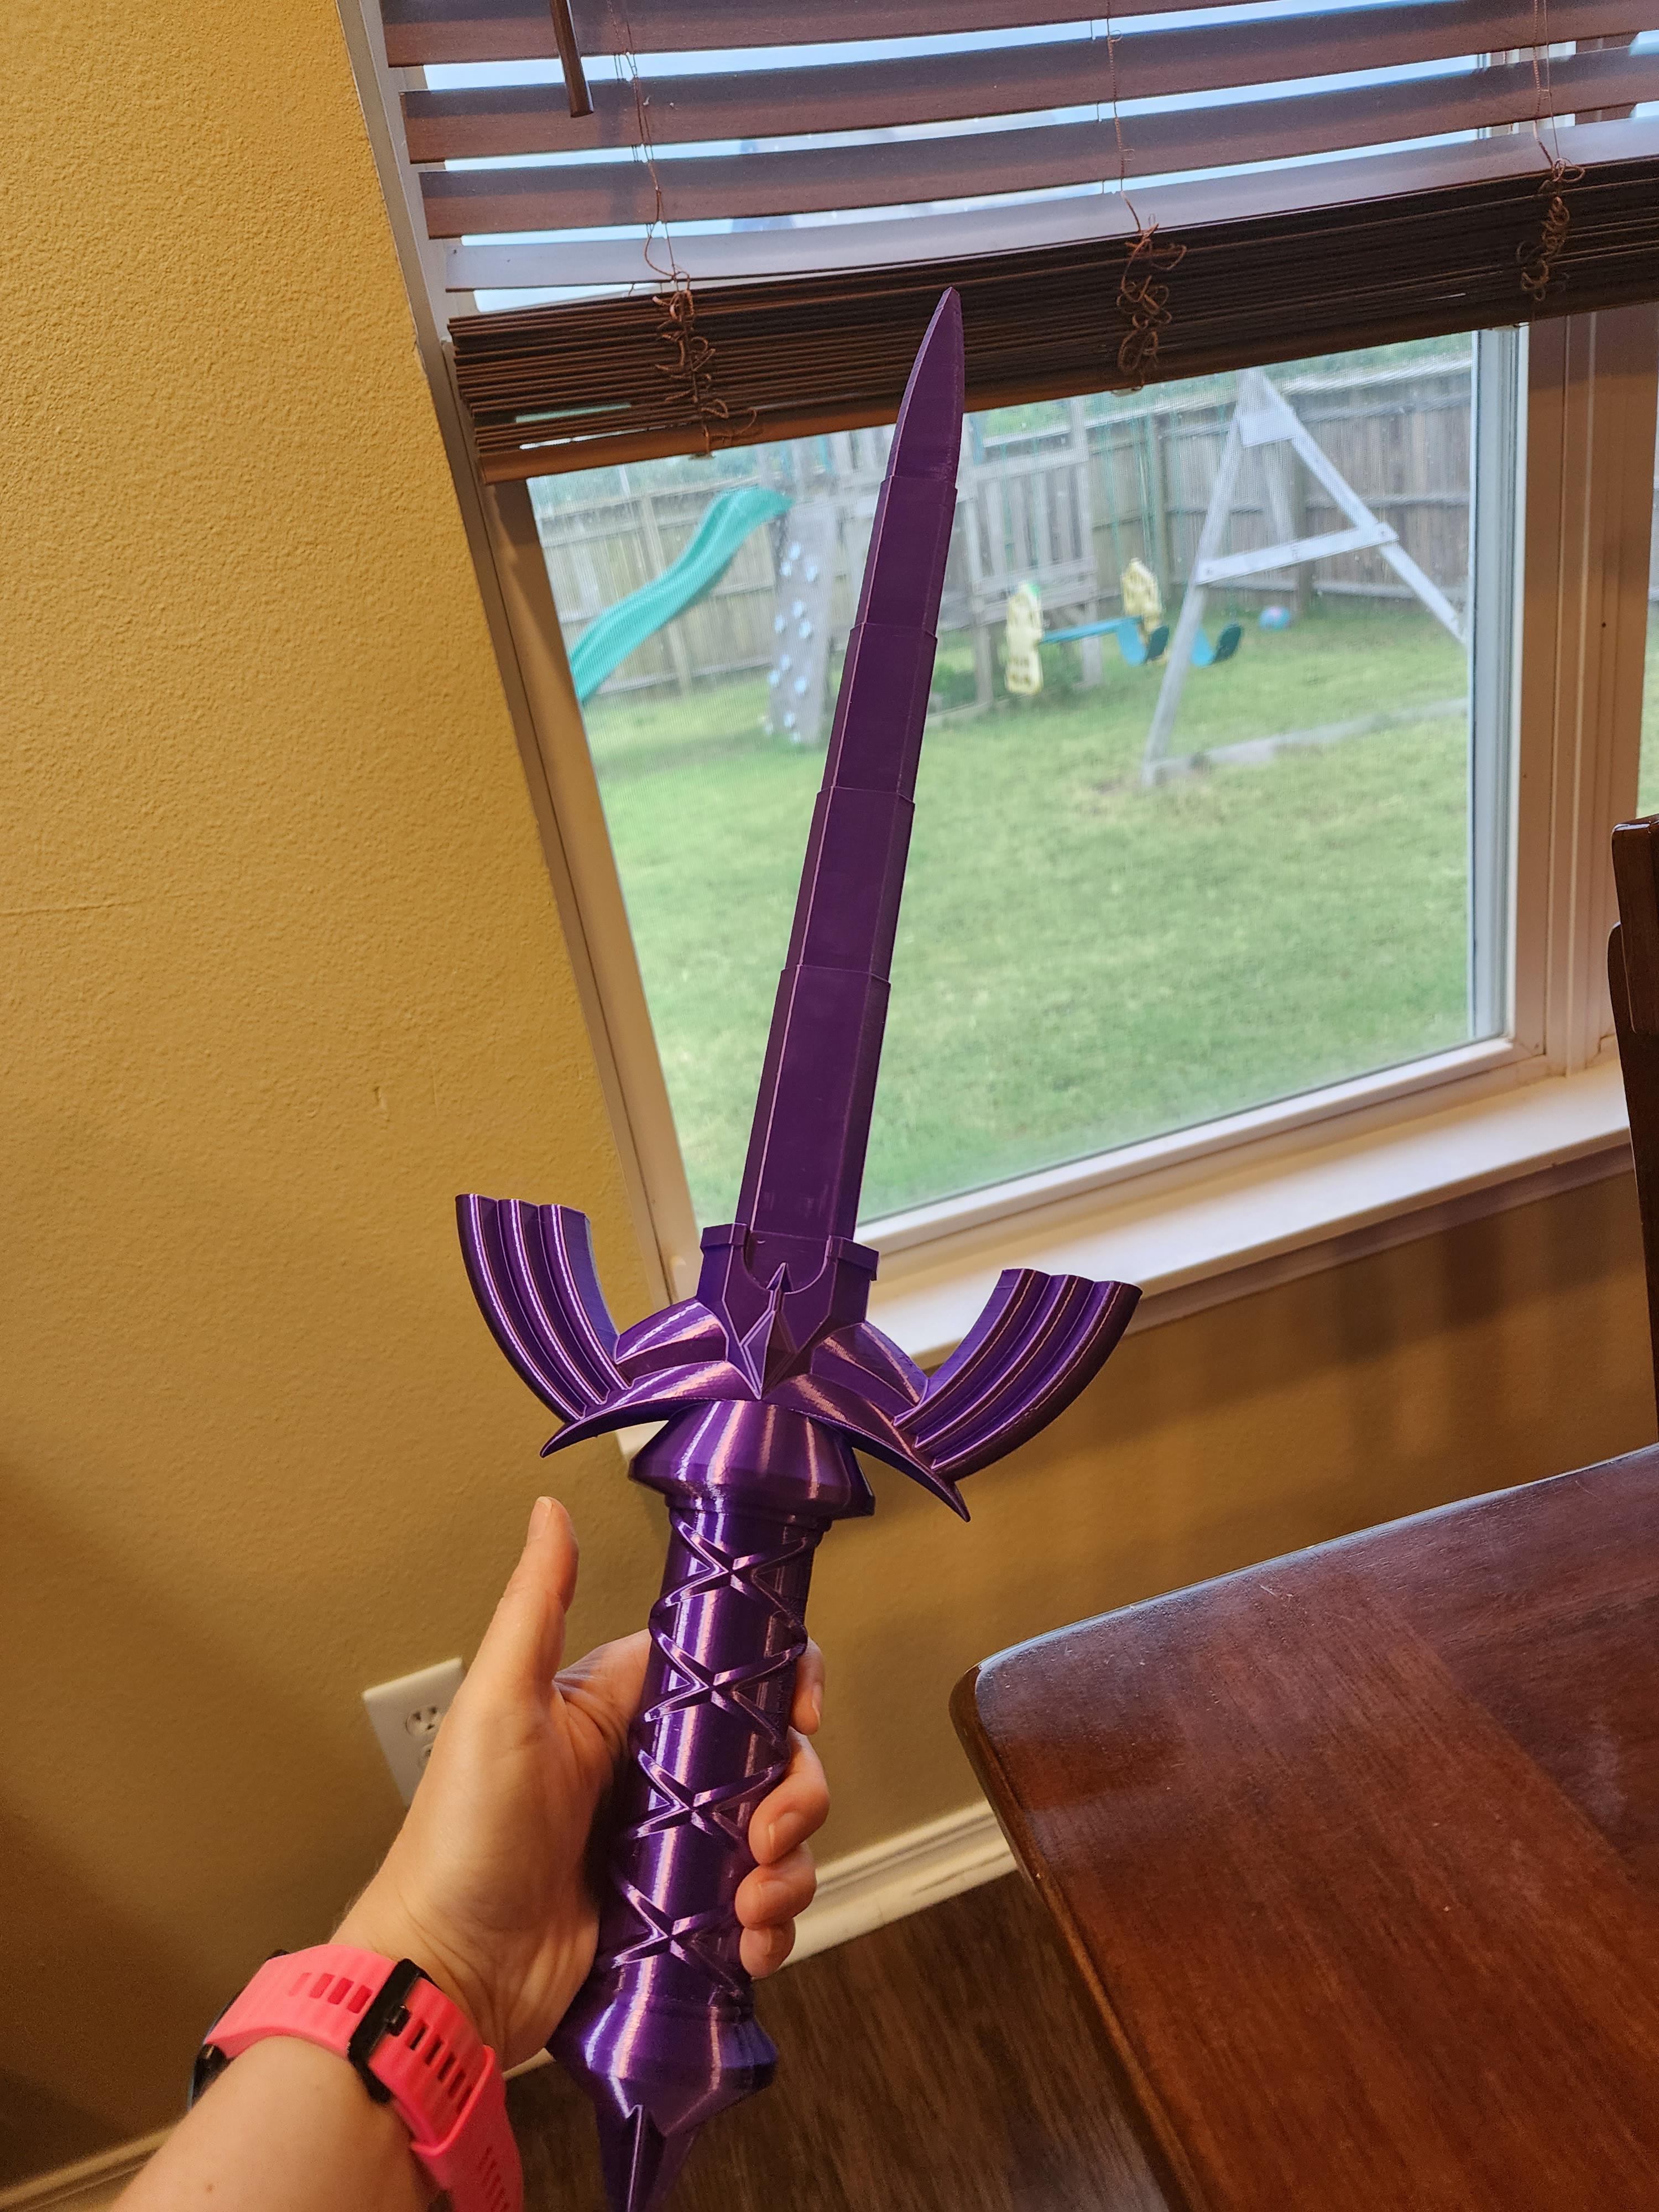 Collapsing Master Sword (Print-in-place) - 3D model by